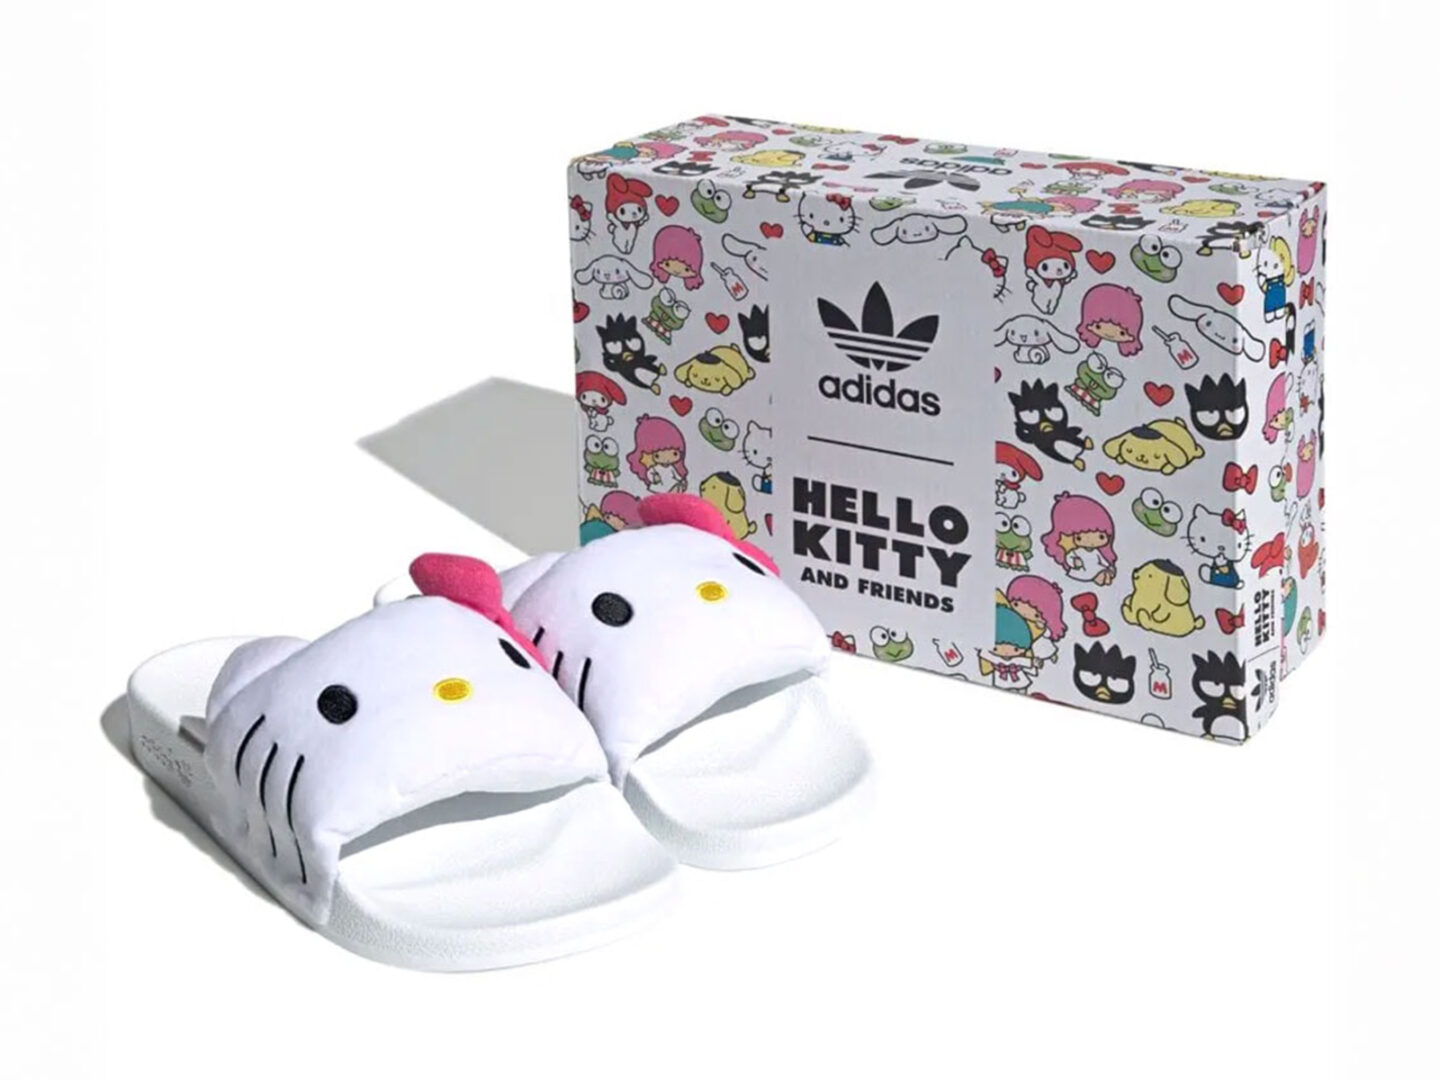 Hello Kitty reunites with adidas for its 50th anniversary